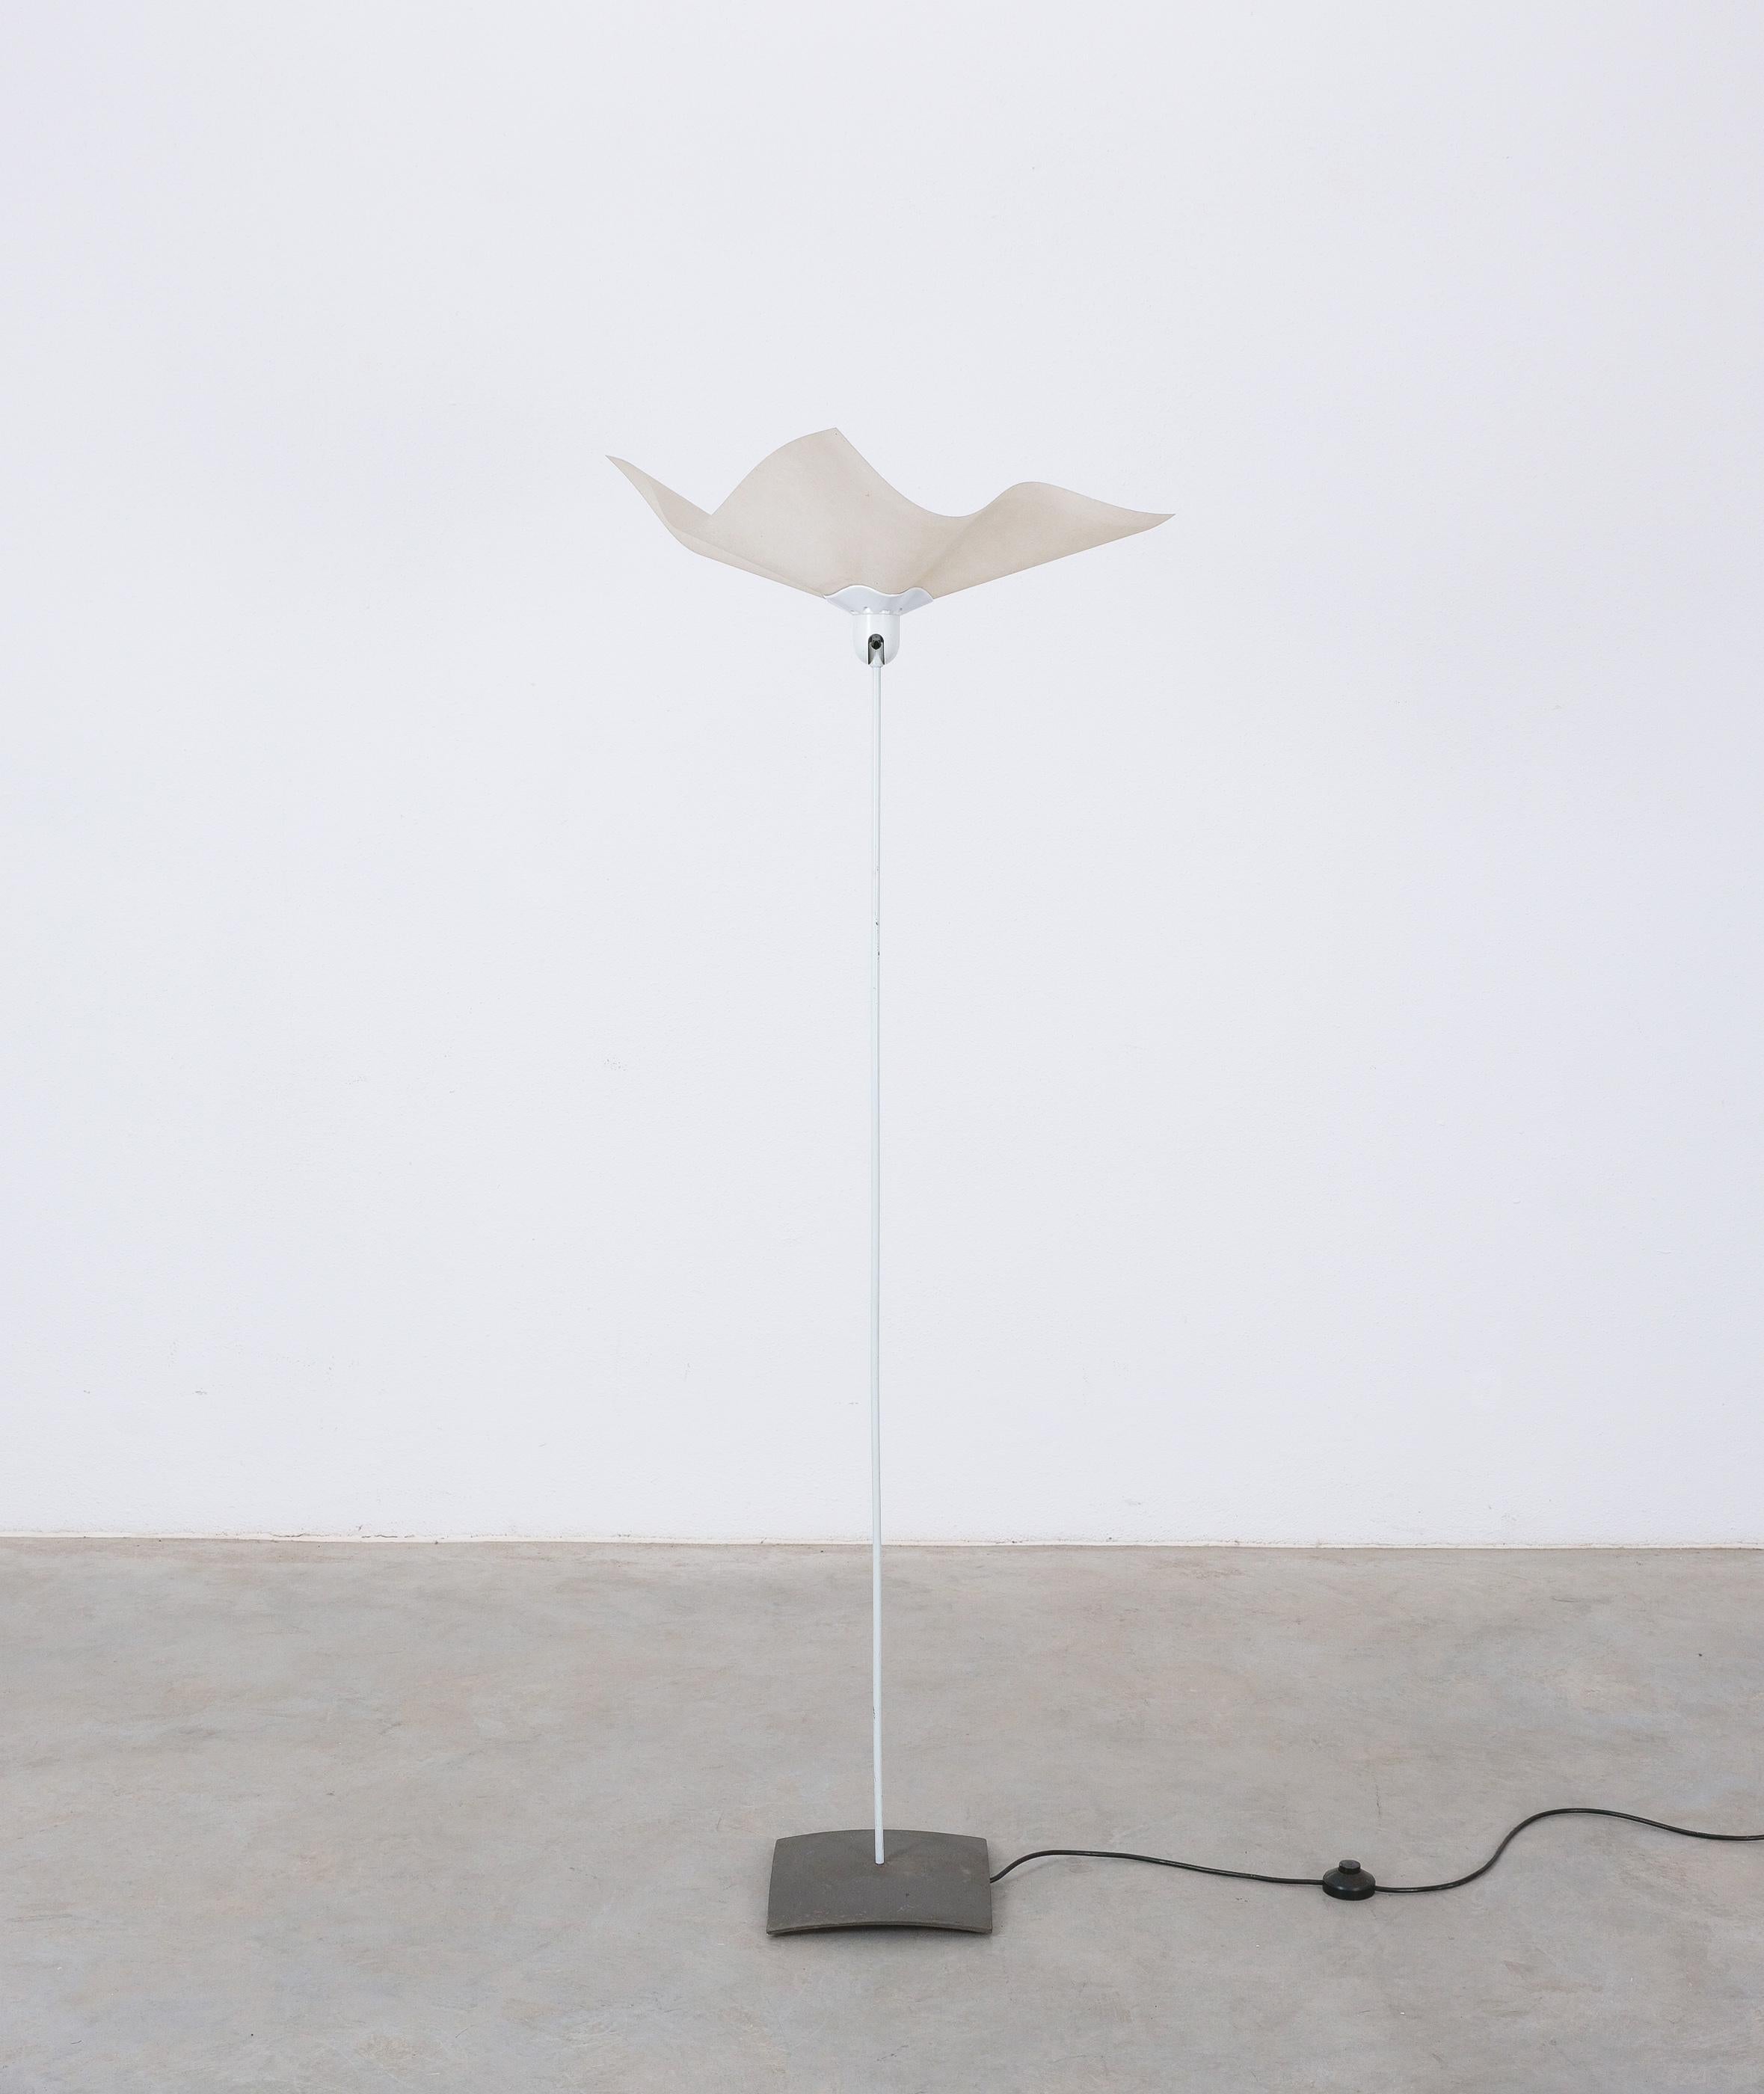 Mario Bellini Area 50 White Floor Lamps (3) by Artemide, Italy, 1976 For Sale 1